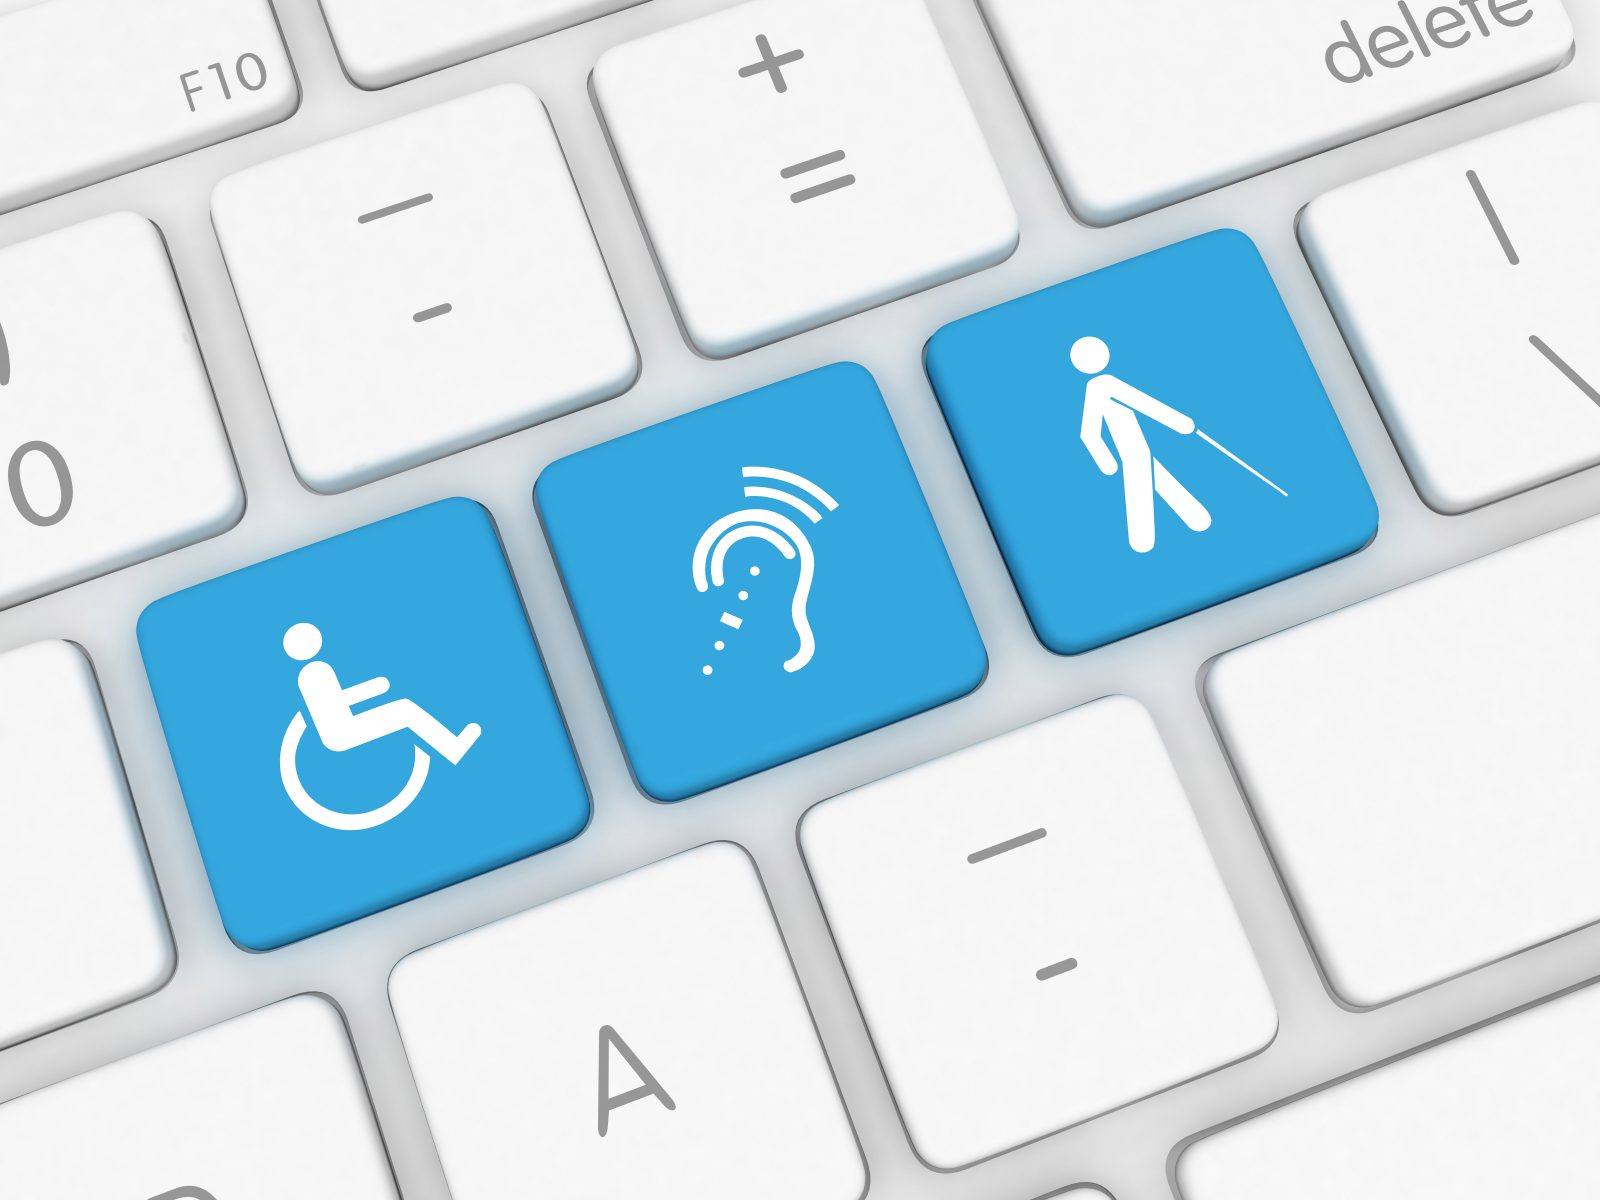 A keyboard with keys showing different accessibility icons.